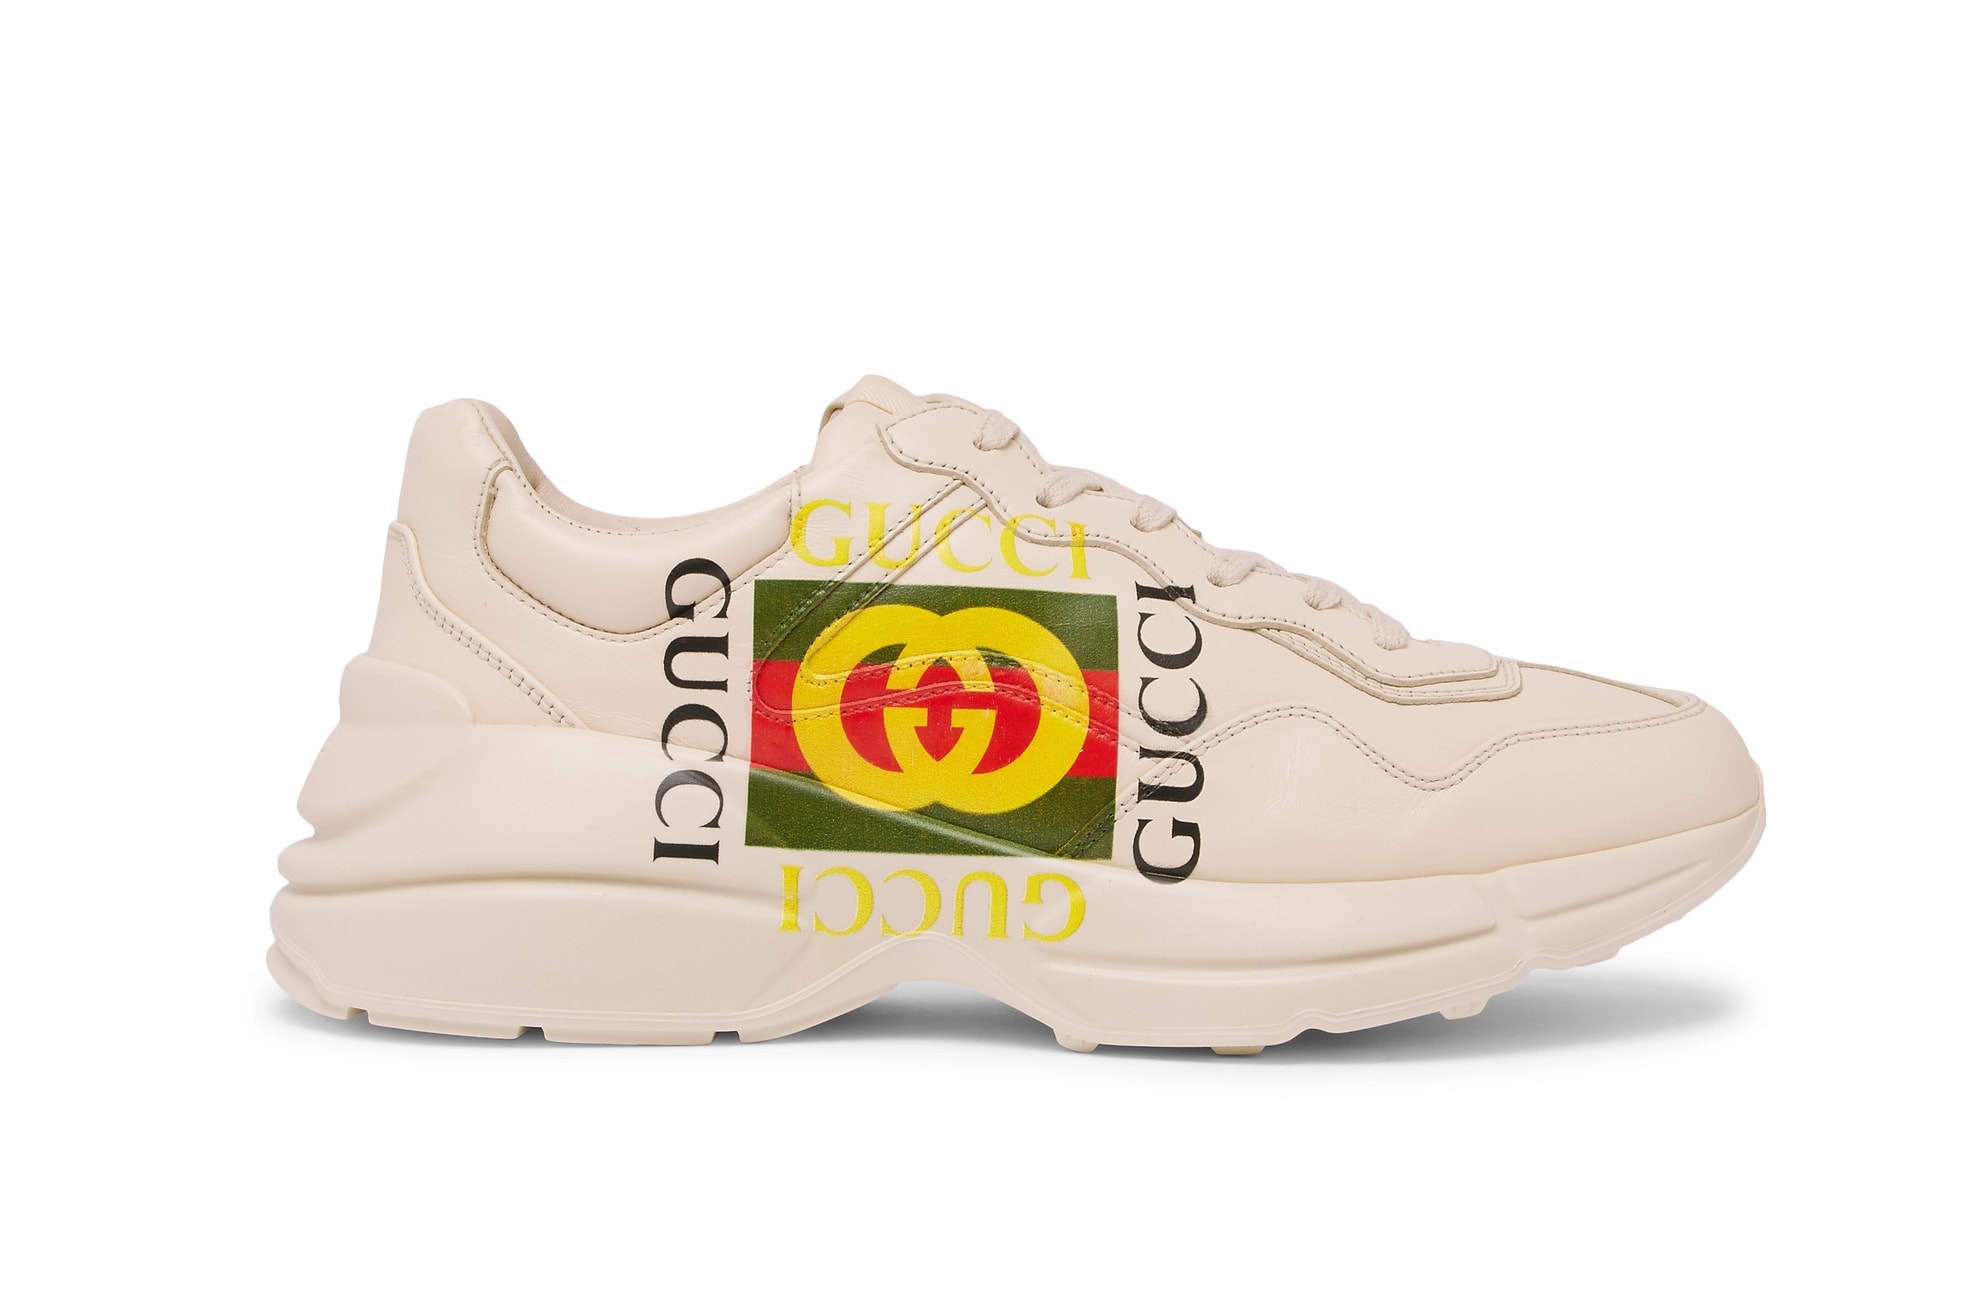 Gucci Logo Rhydon Sneaker Chunky Dad Shoe White Cream Retro Colorful Statement Iconic Piece Order Available Now Luxury Limited